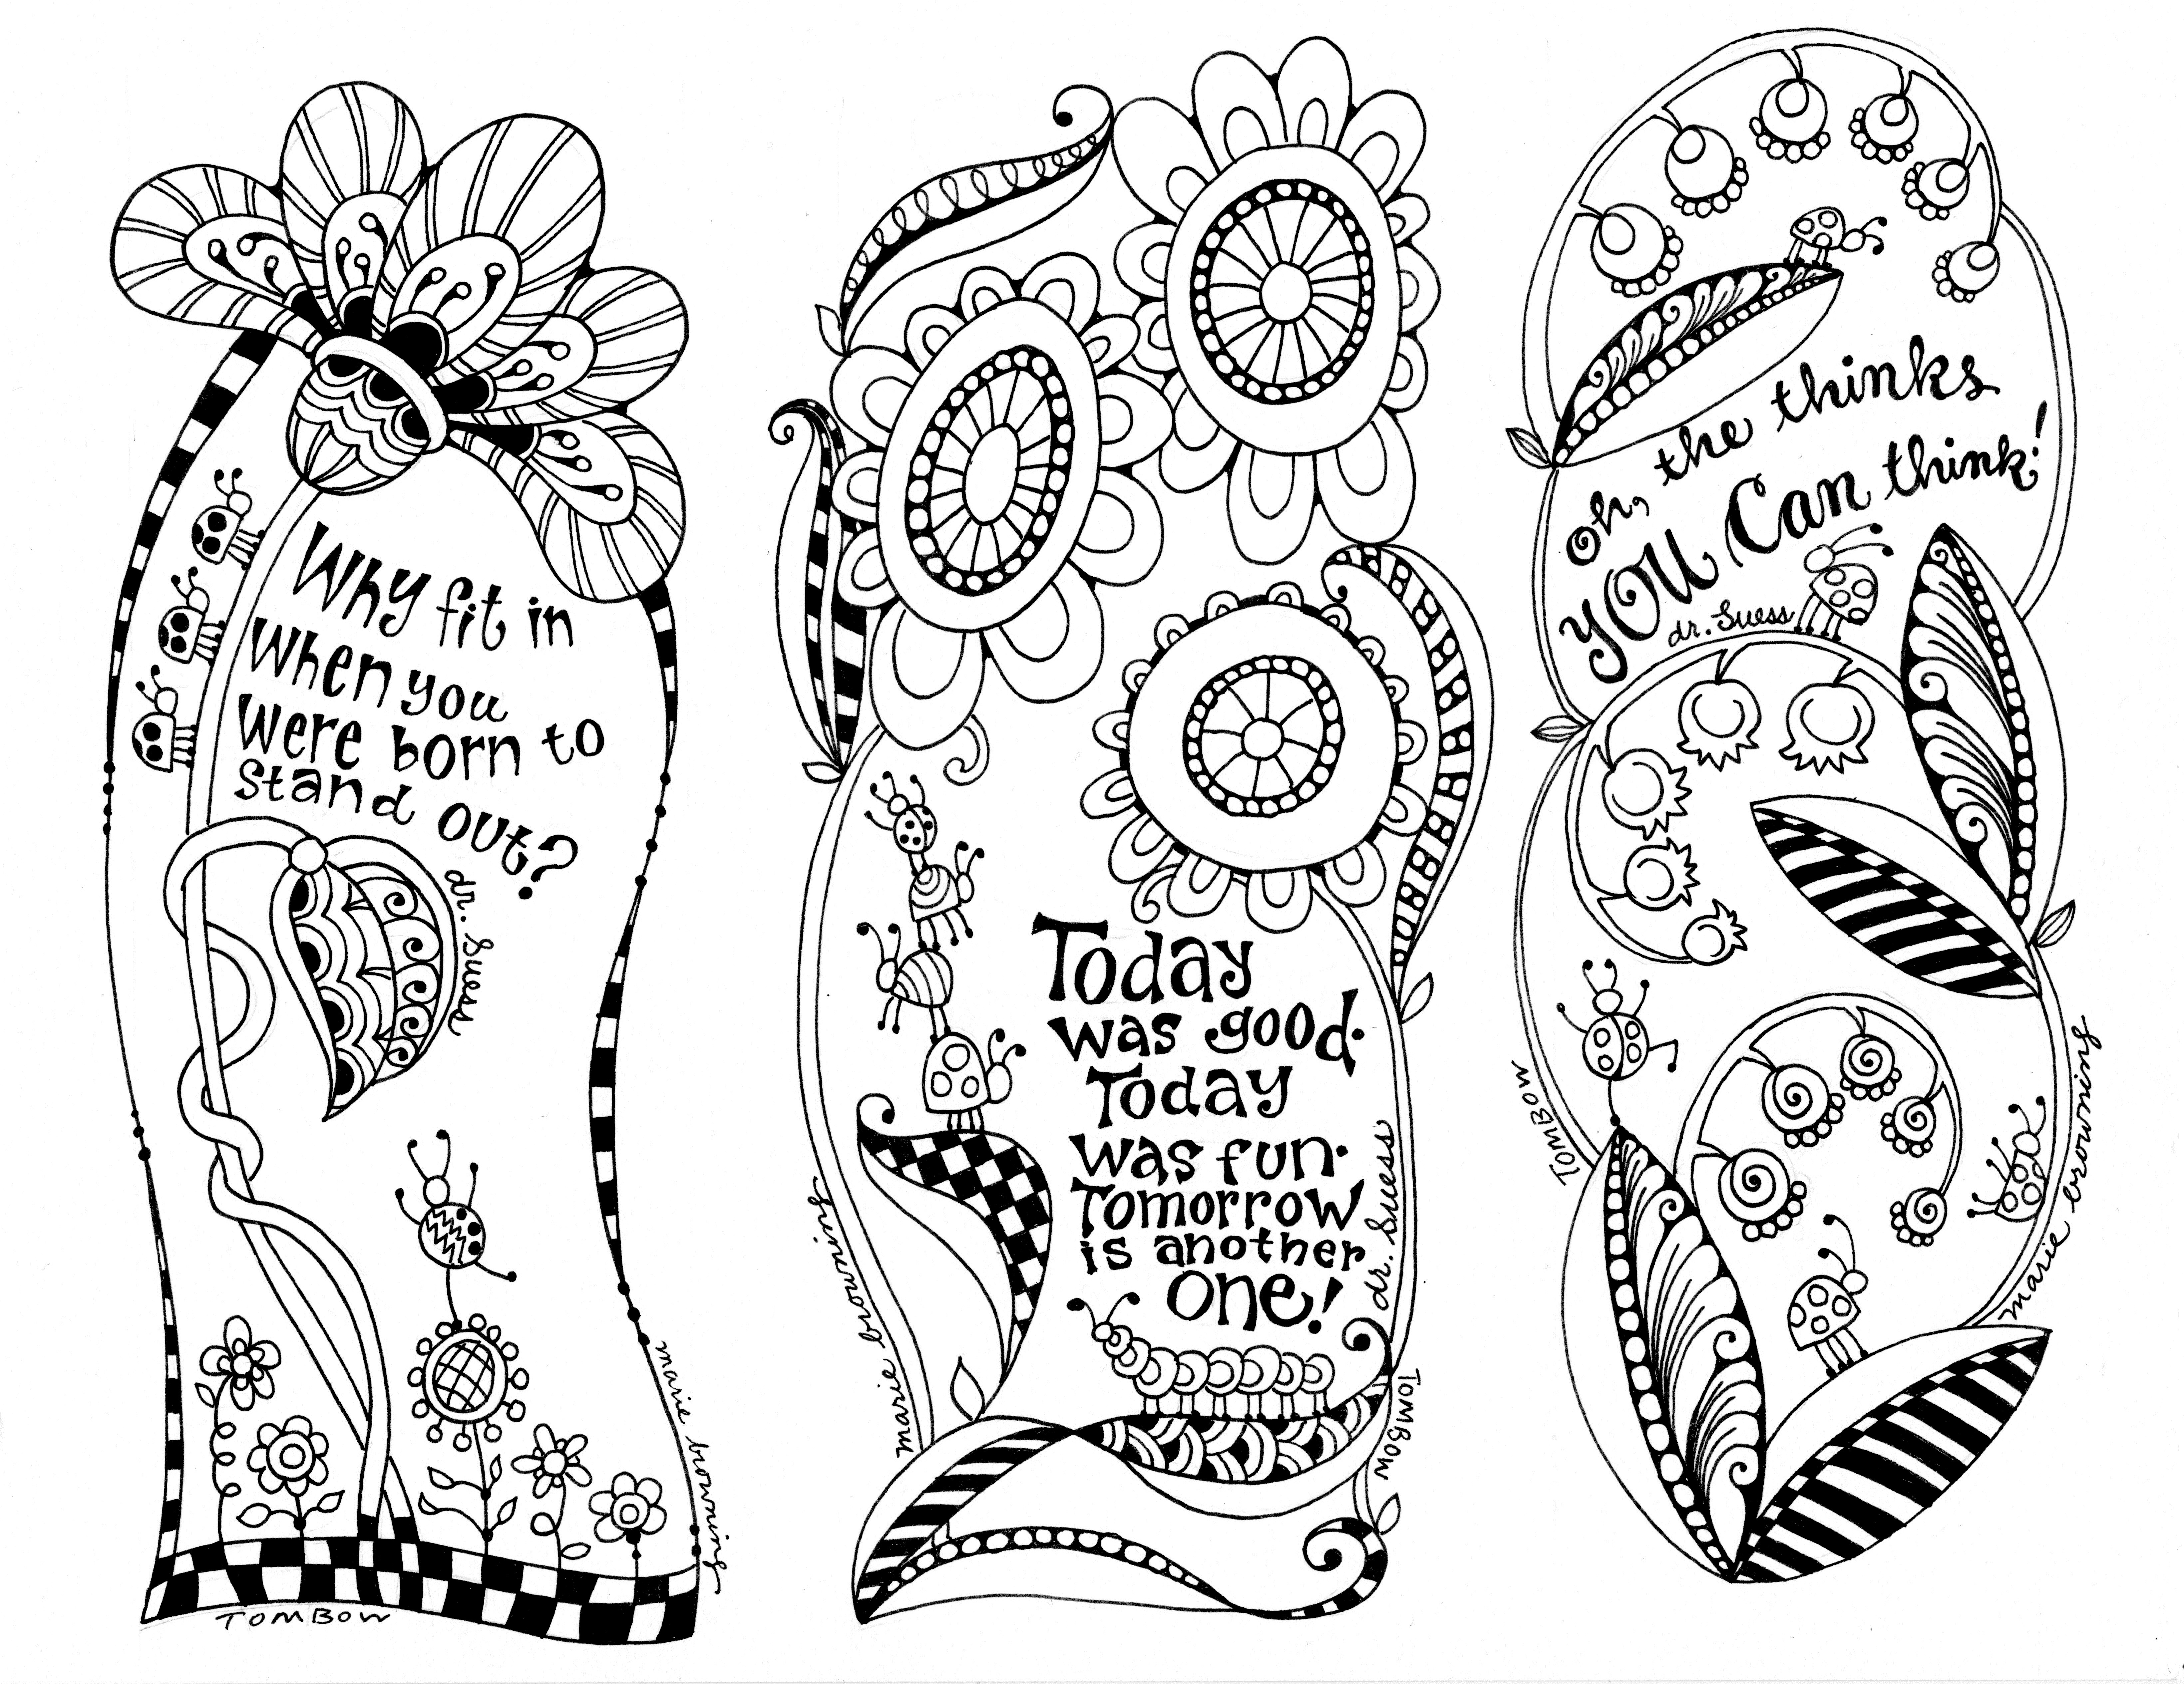 Download and print the coloring page by clicking